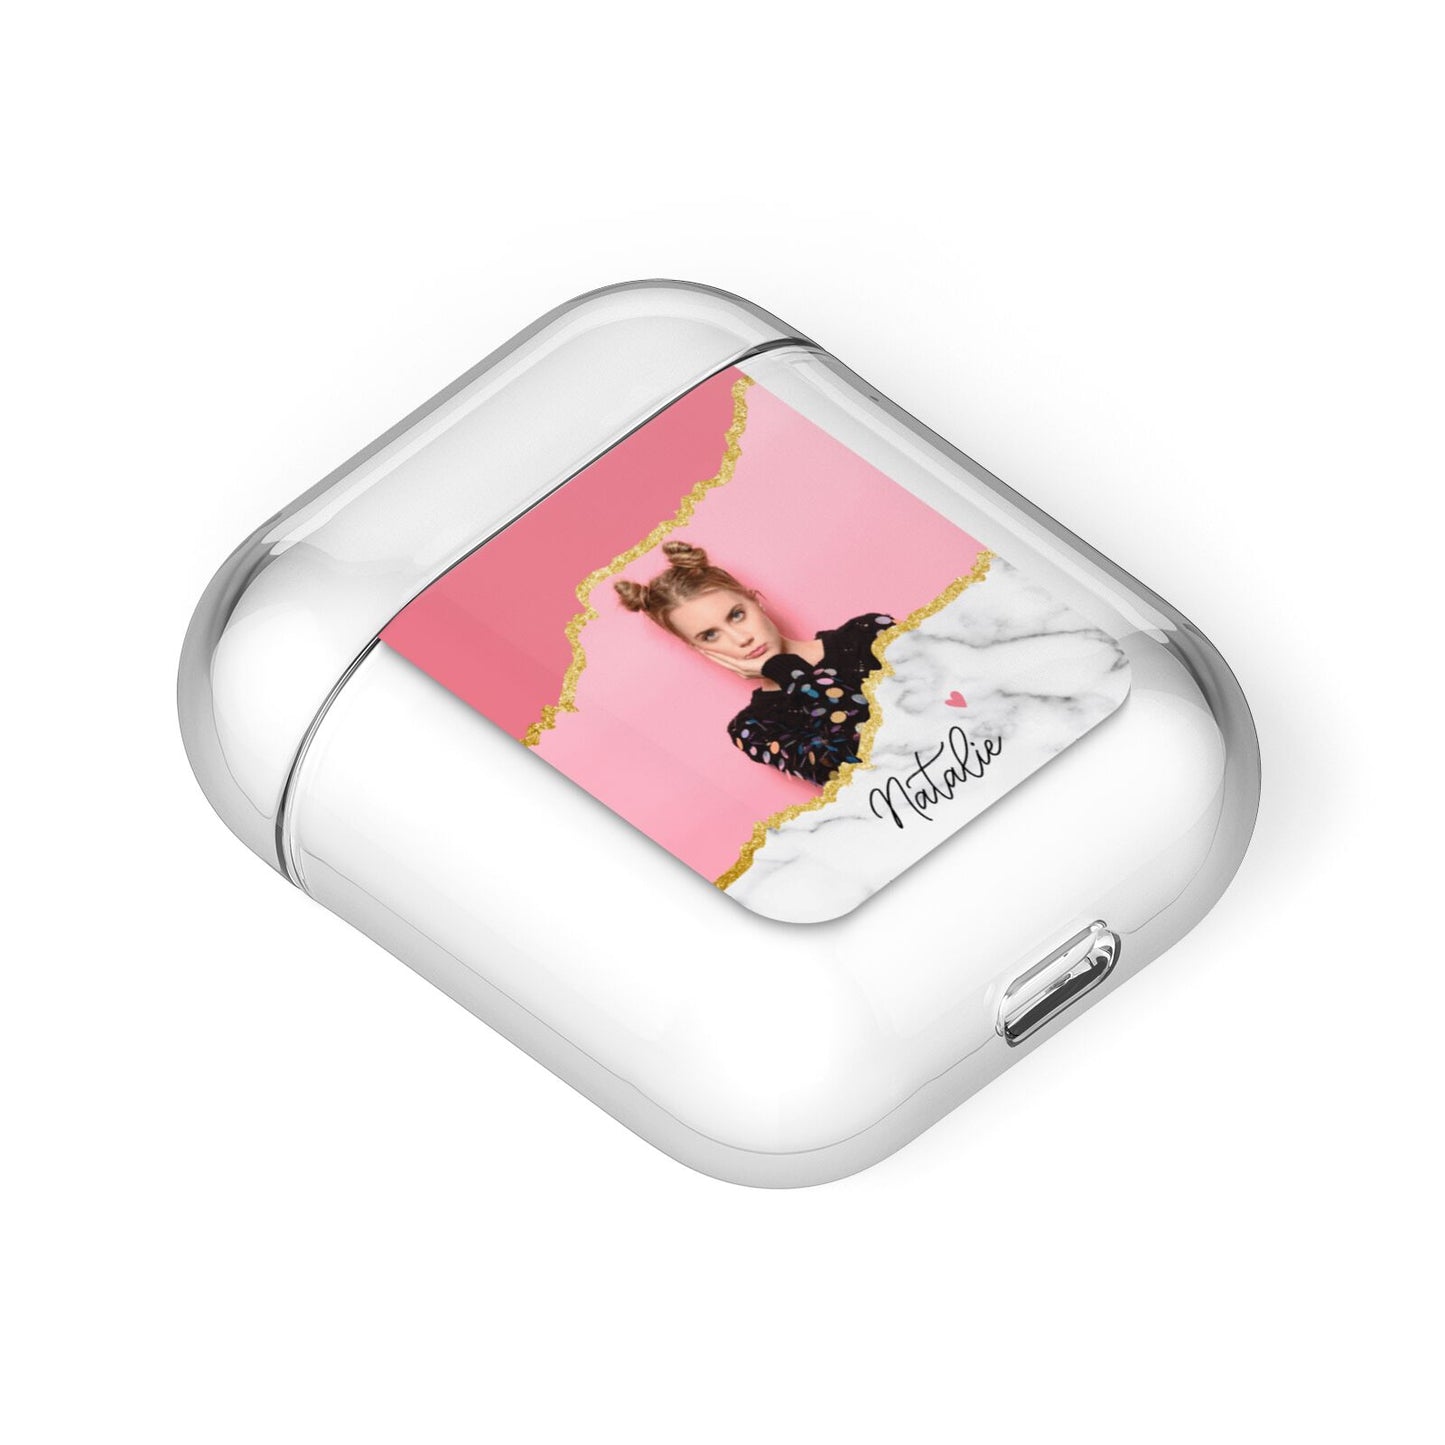 Personalised Marble Photo AirPods Case Laid Flat